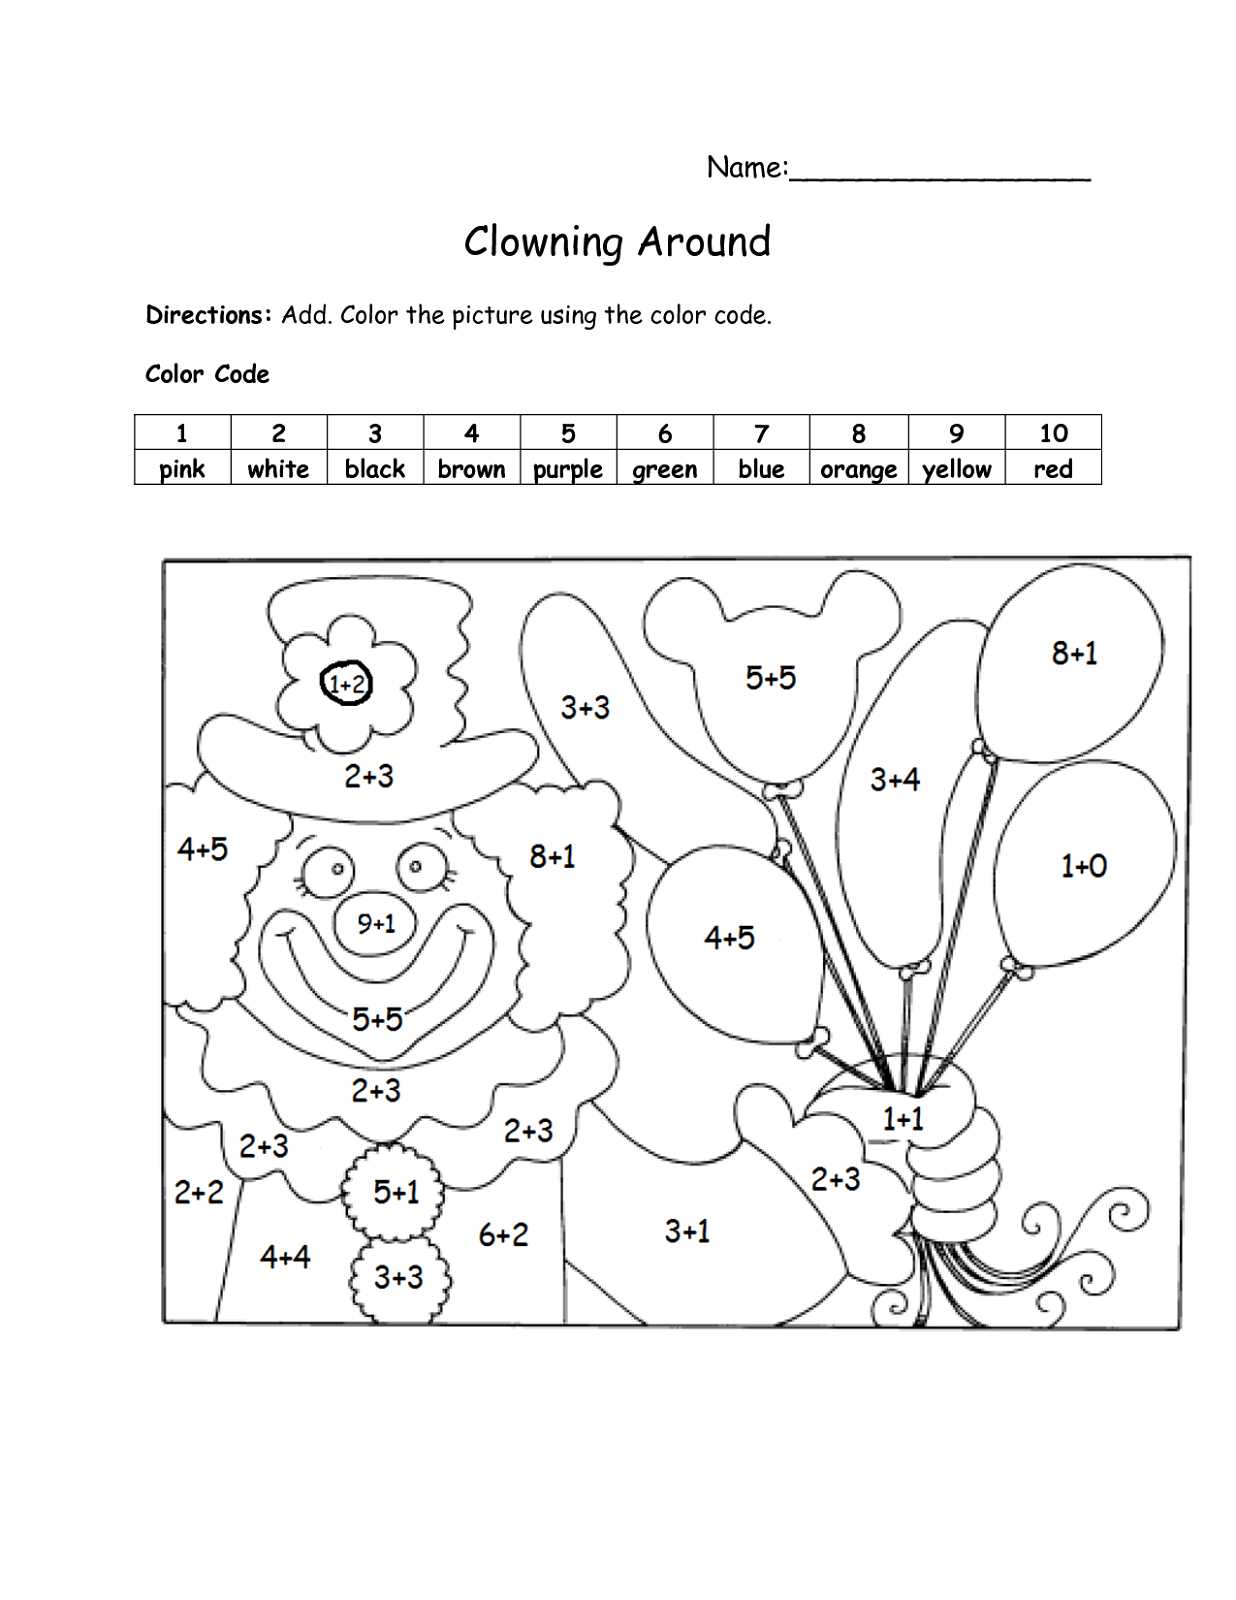 Worksheets for Kids with Autism as Well as Fun Math Worksheets to Print Activity Shelter Fun Best